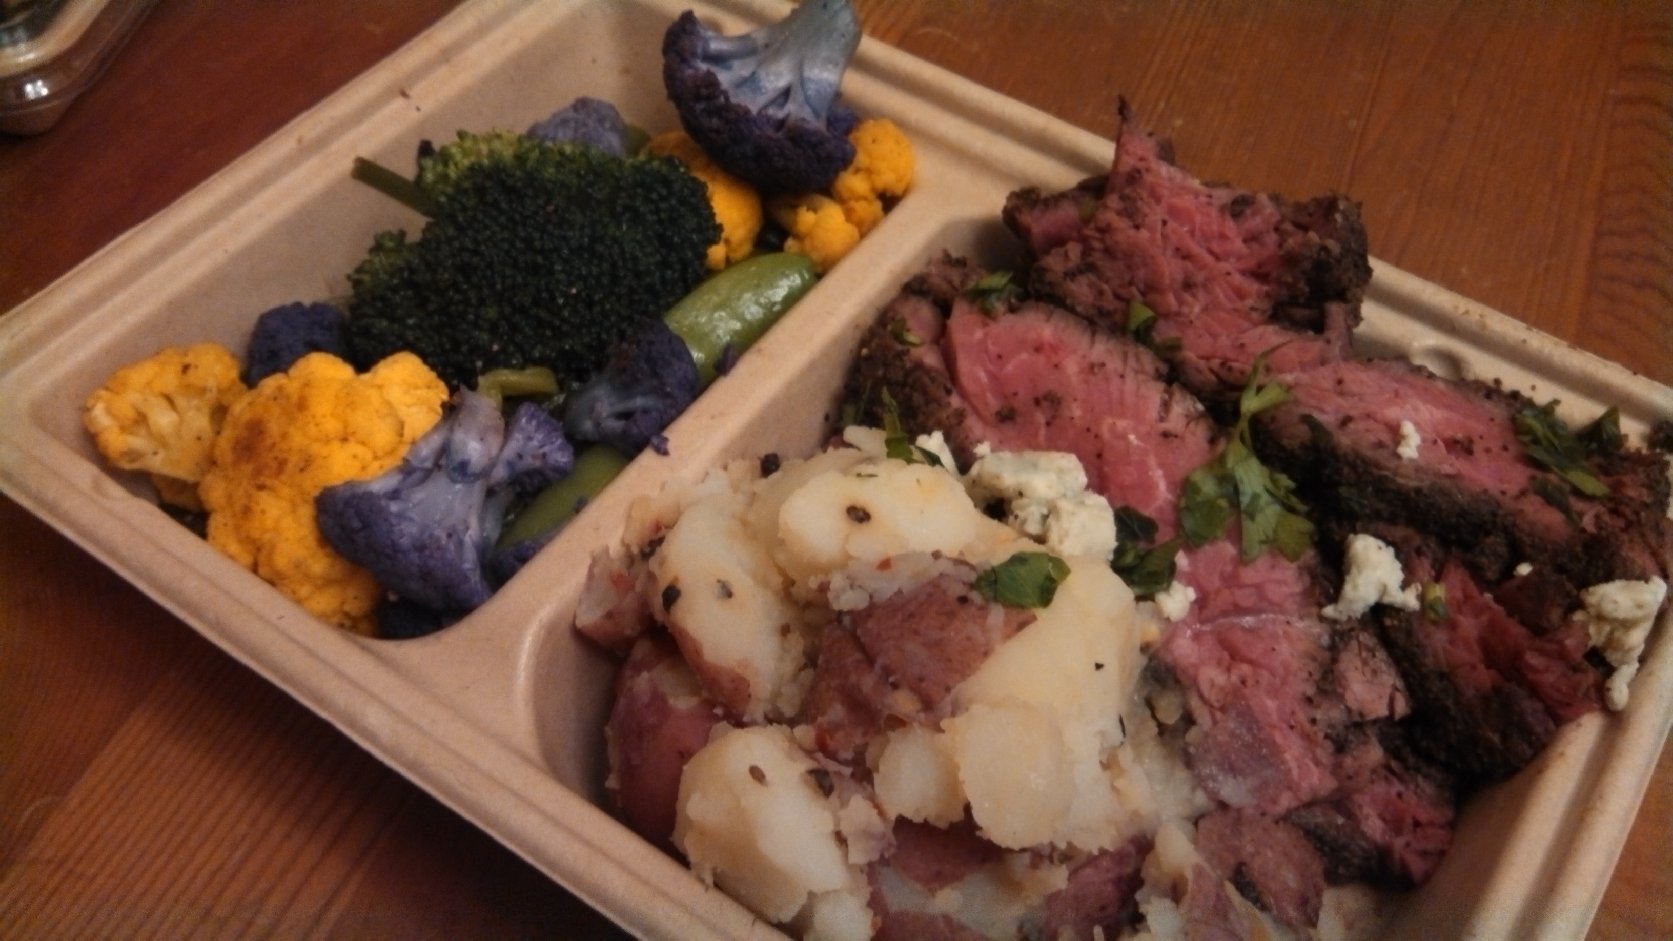 The steak and potatoes didn't look like much in its tray. Photo: Kelly O'Mara